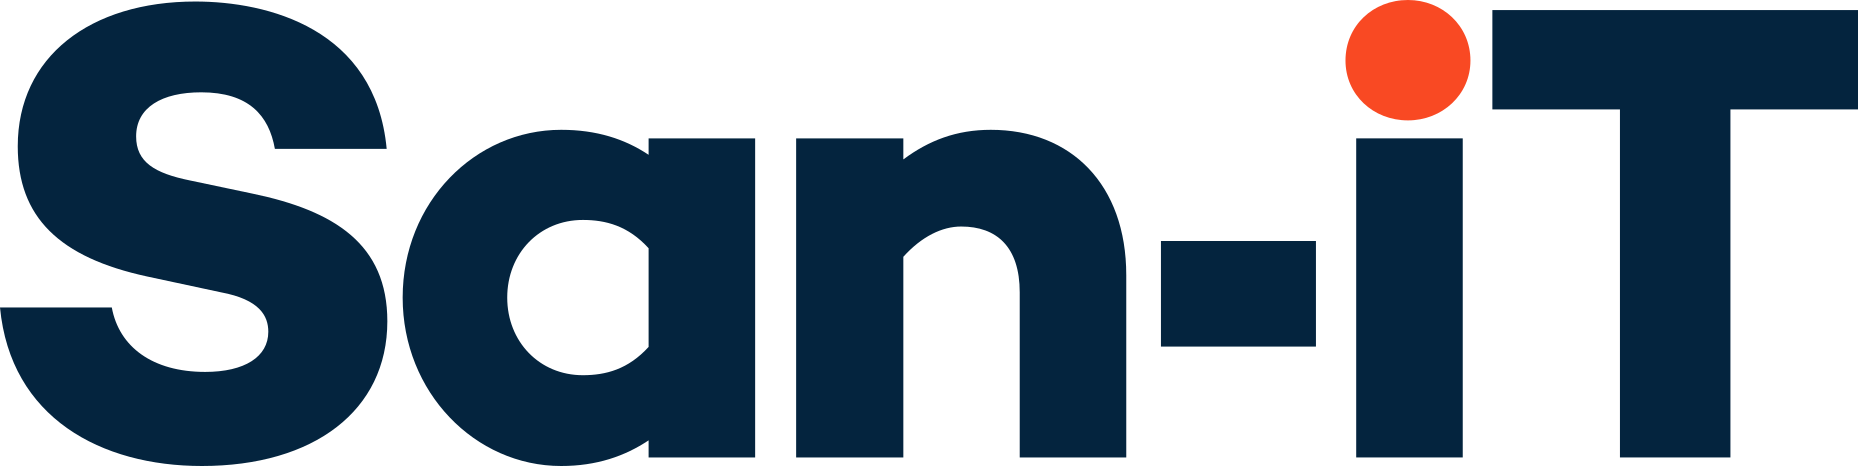 logo for San-iT Limited